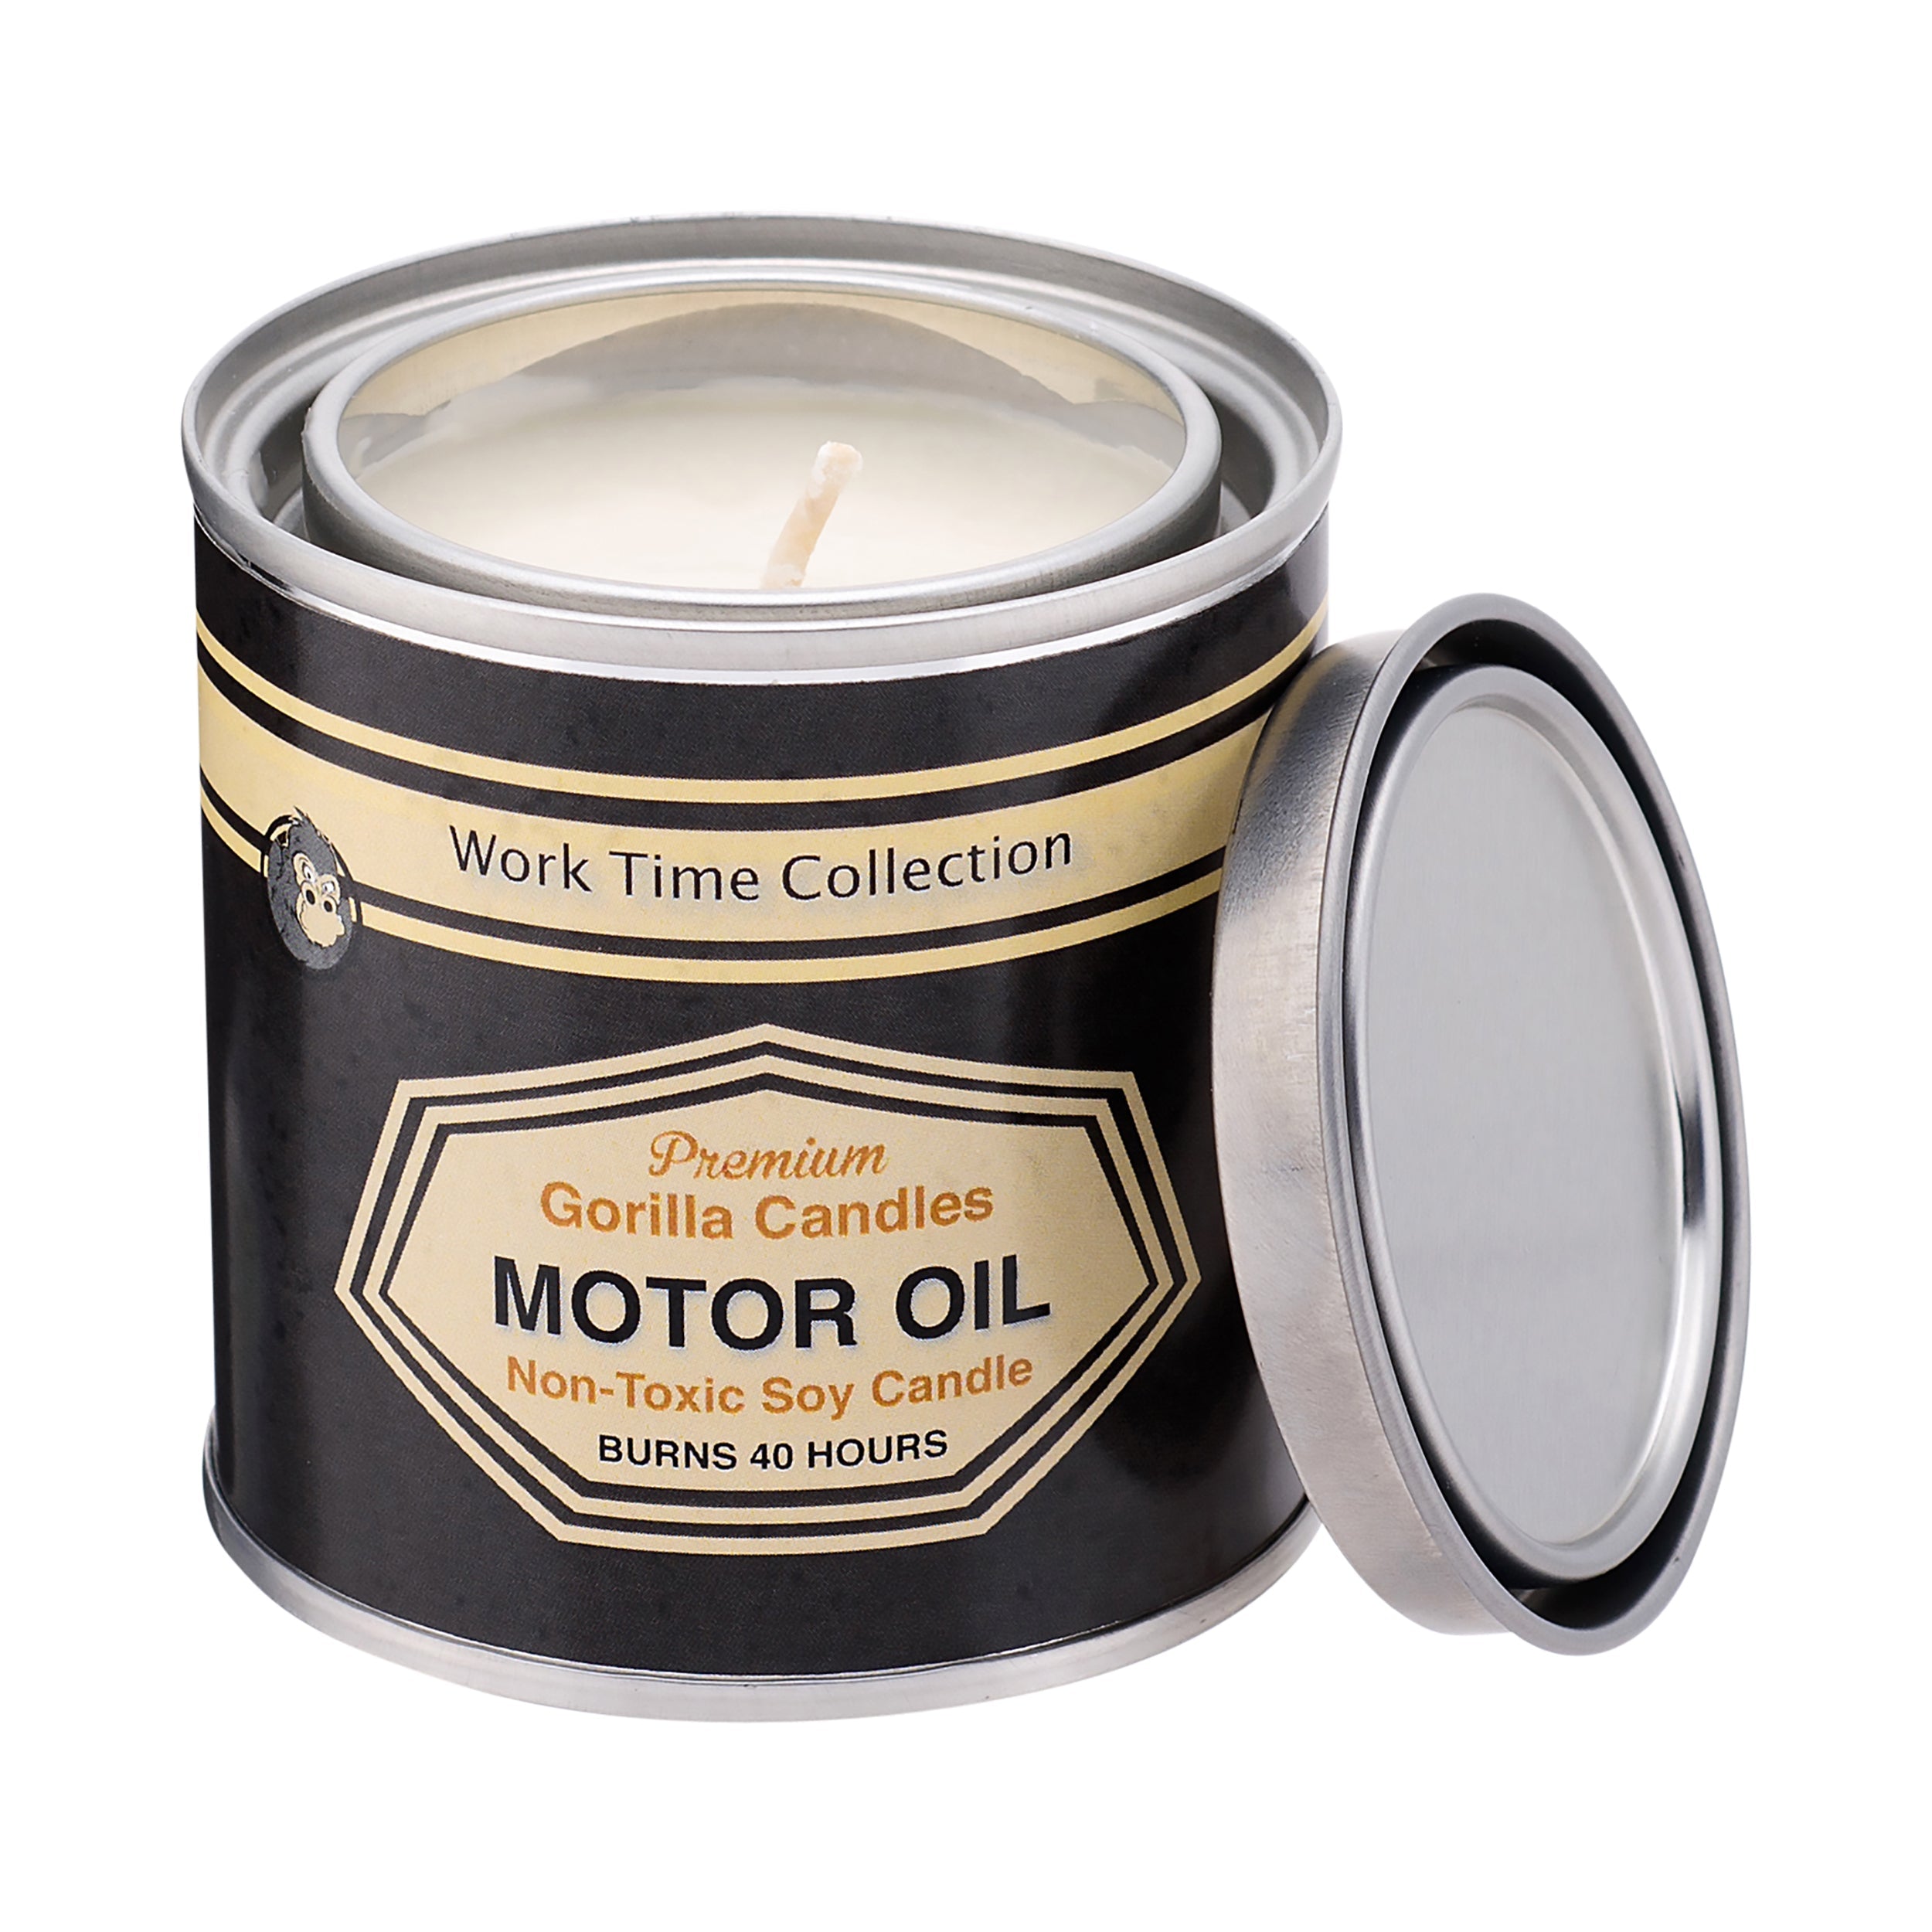 Motor Oil by Gorilla Candles™